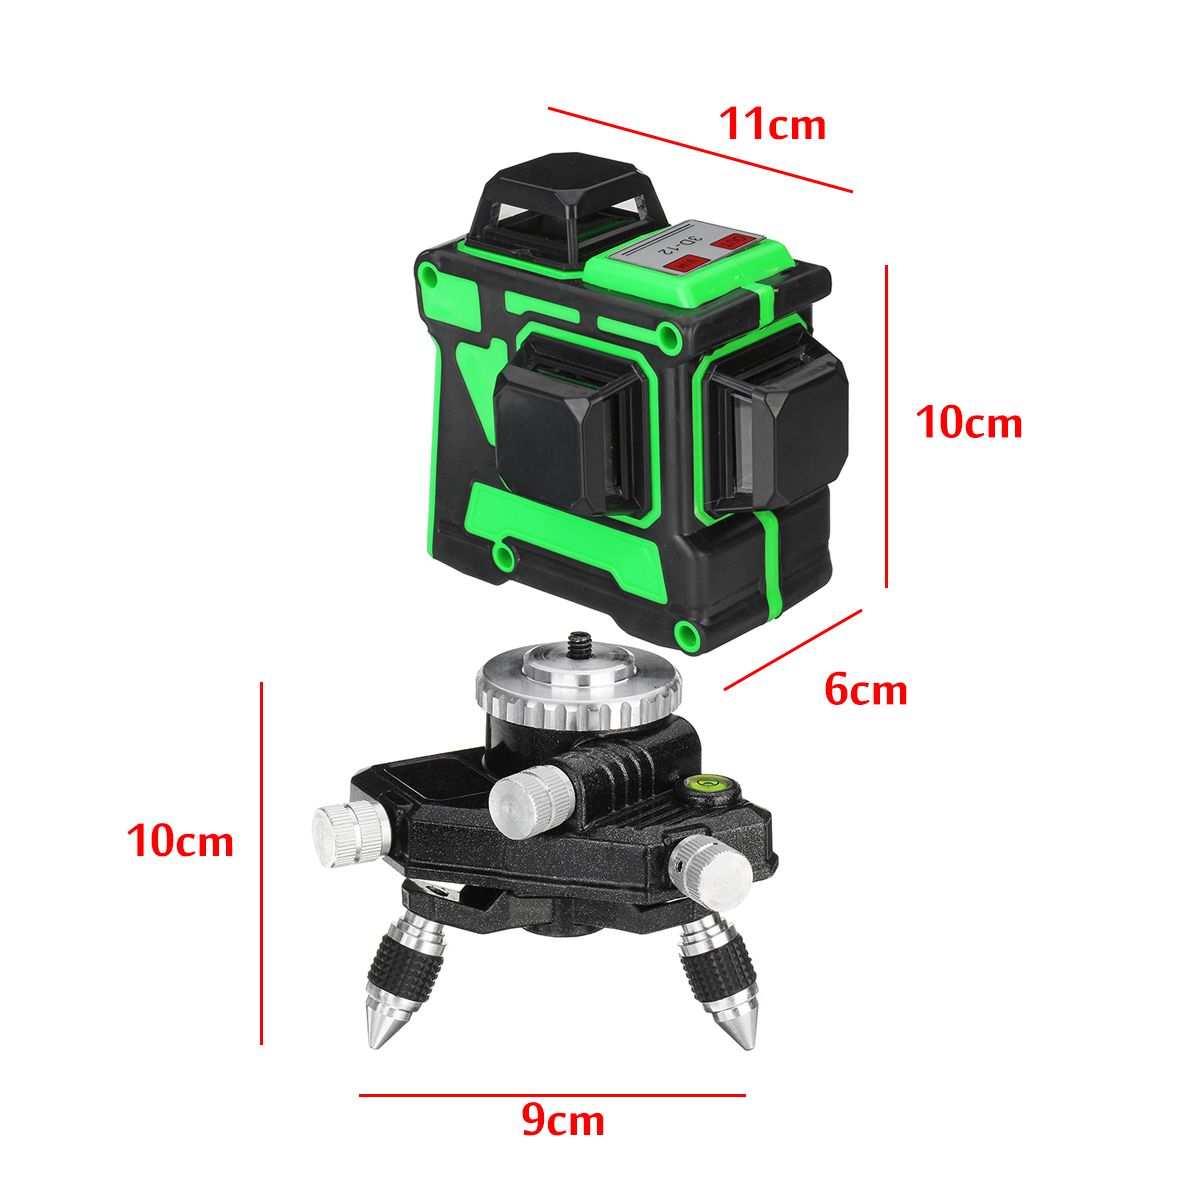 12-Lines-Cross-Green-Light-3D-Laser-360deg-Level-Self-Leveling-Rotary-Measure-Tool-Indoor-and-Outdoo-1748439